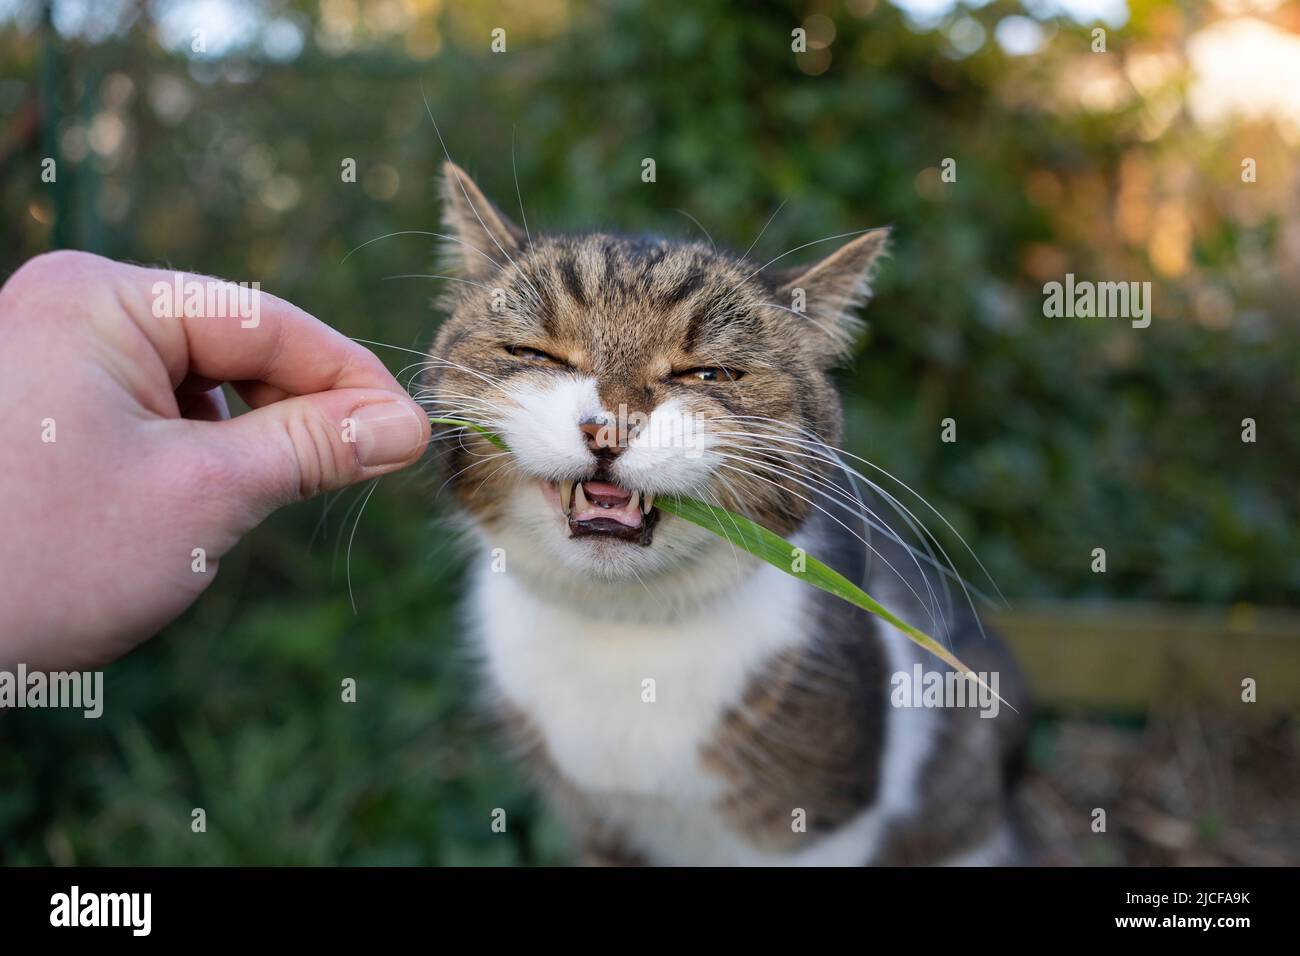 pet owner feeding cat holding blade of grass in hand Stock Photo